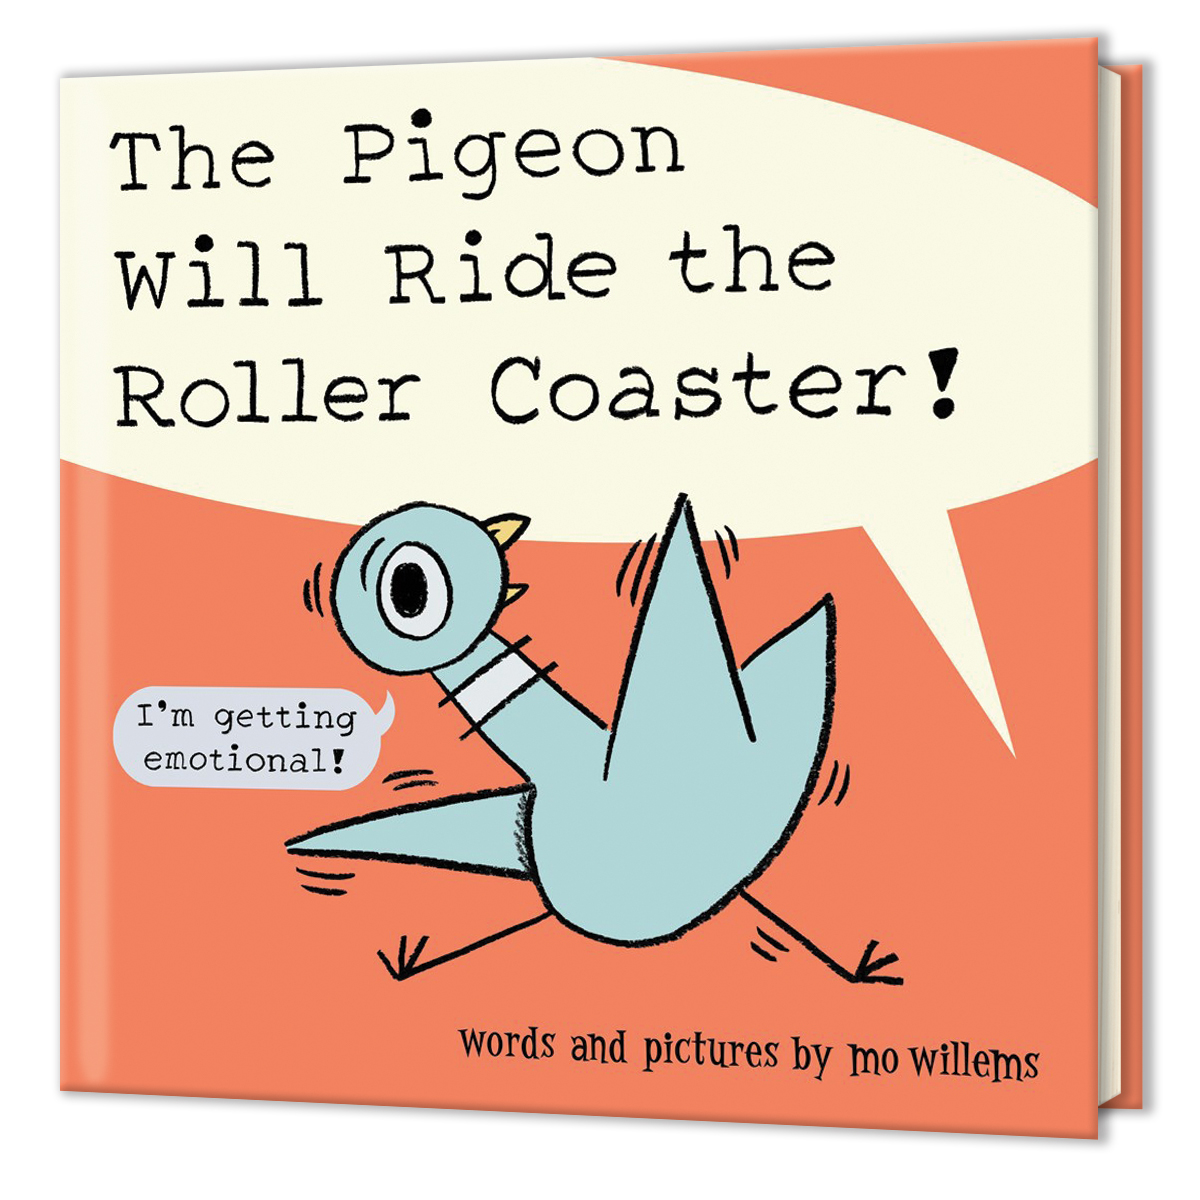  The Pigeon Will Ride the Roller Coaster! 